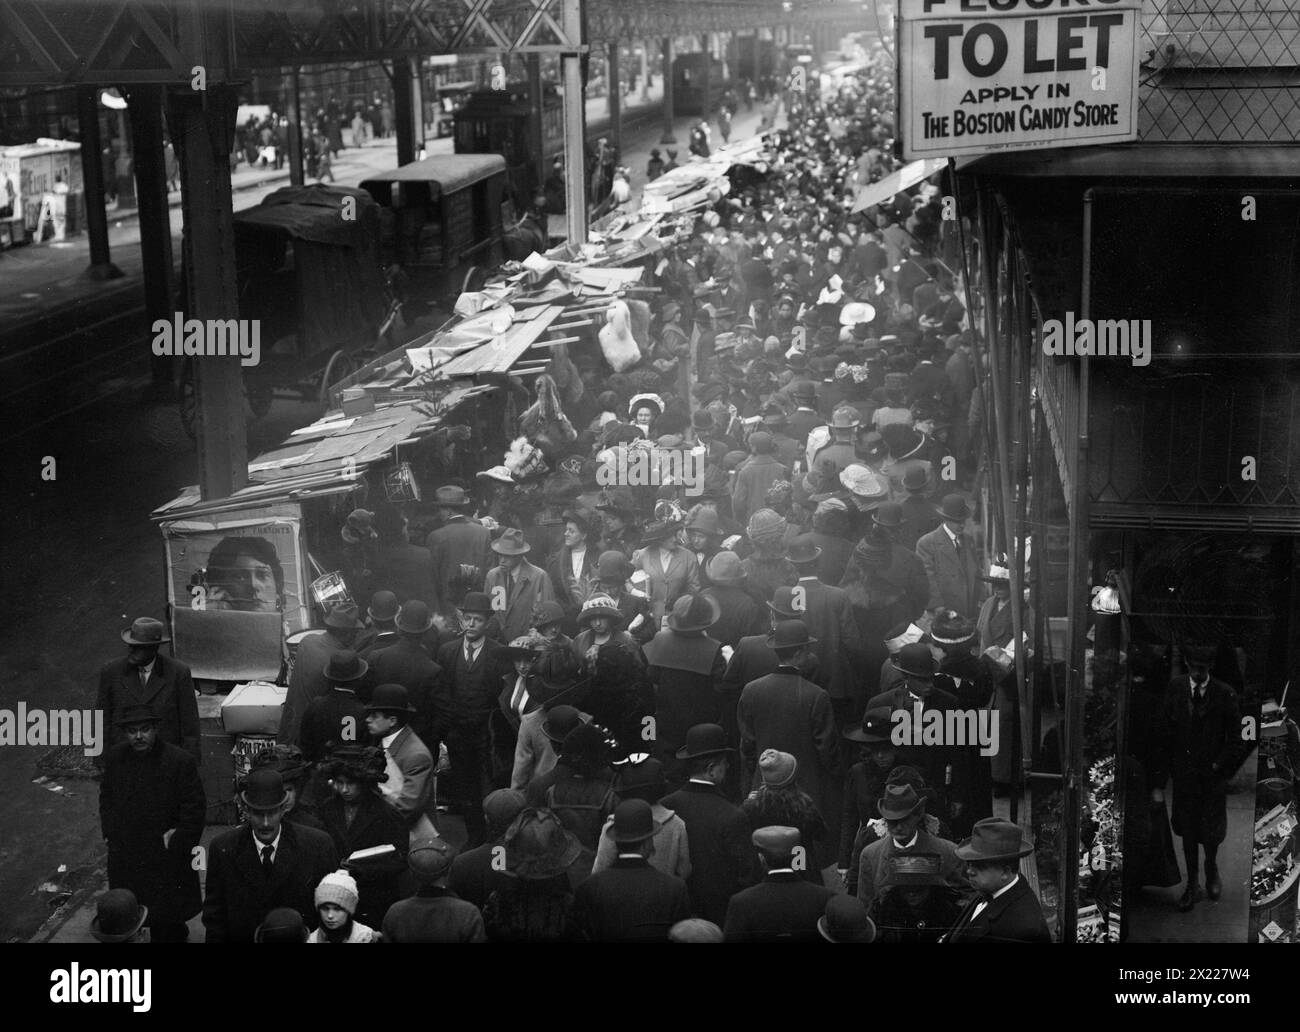 Crowded street, possibly near a subway station, between c1910 and c1915. Stock Photo